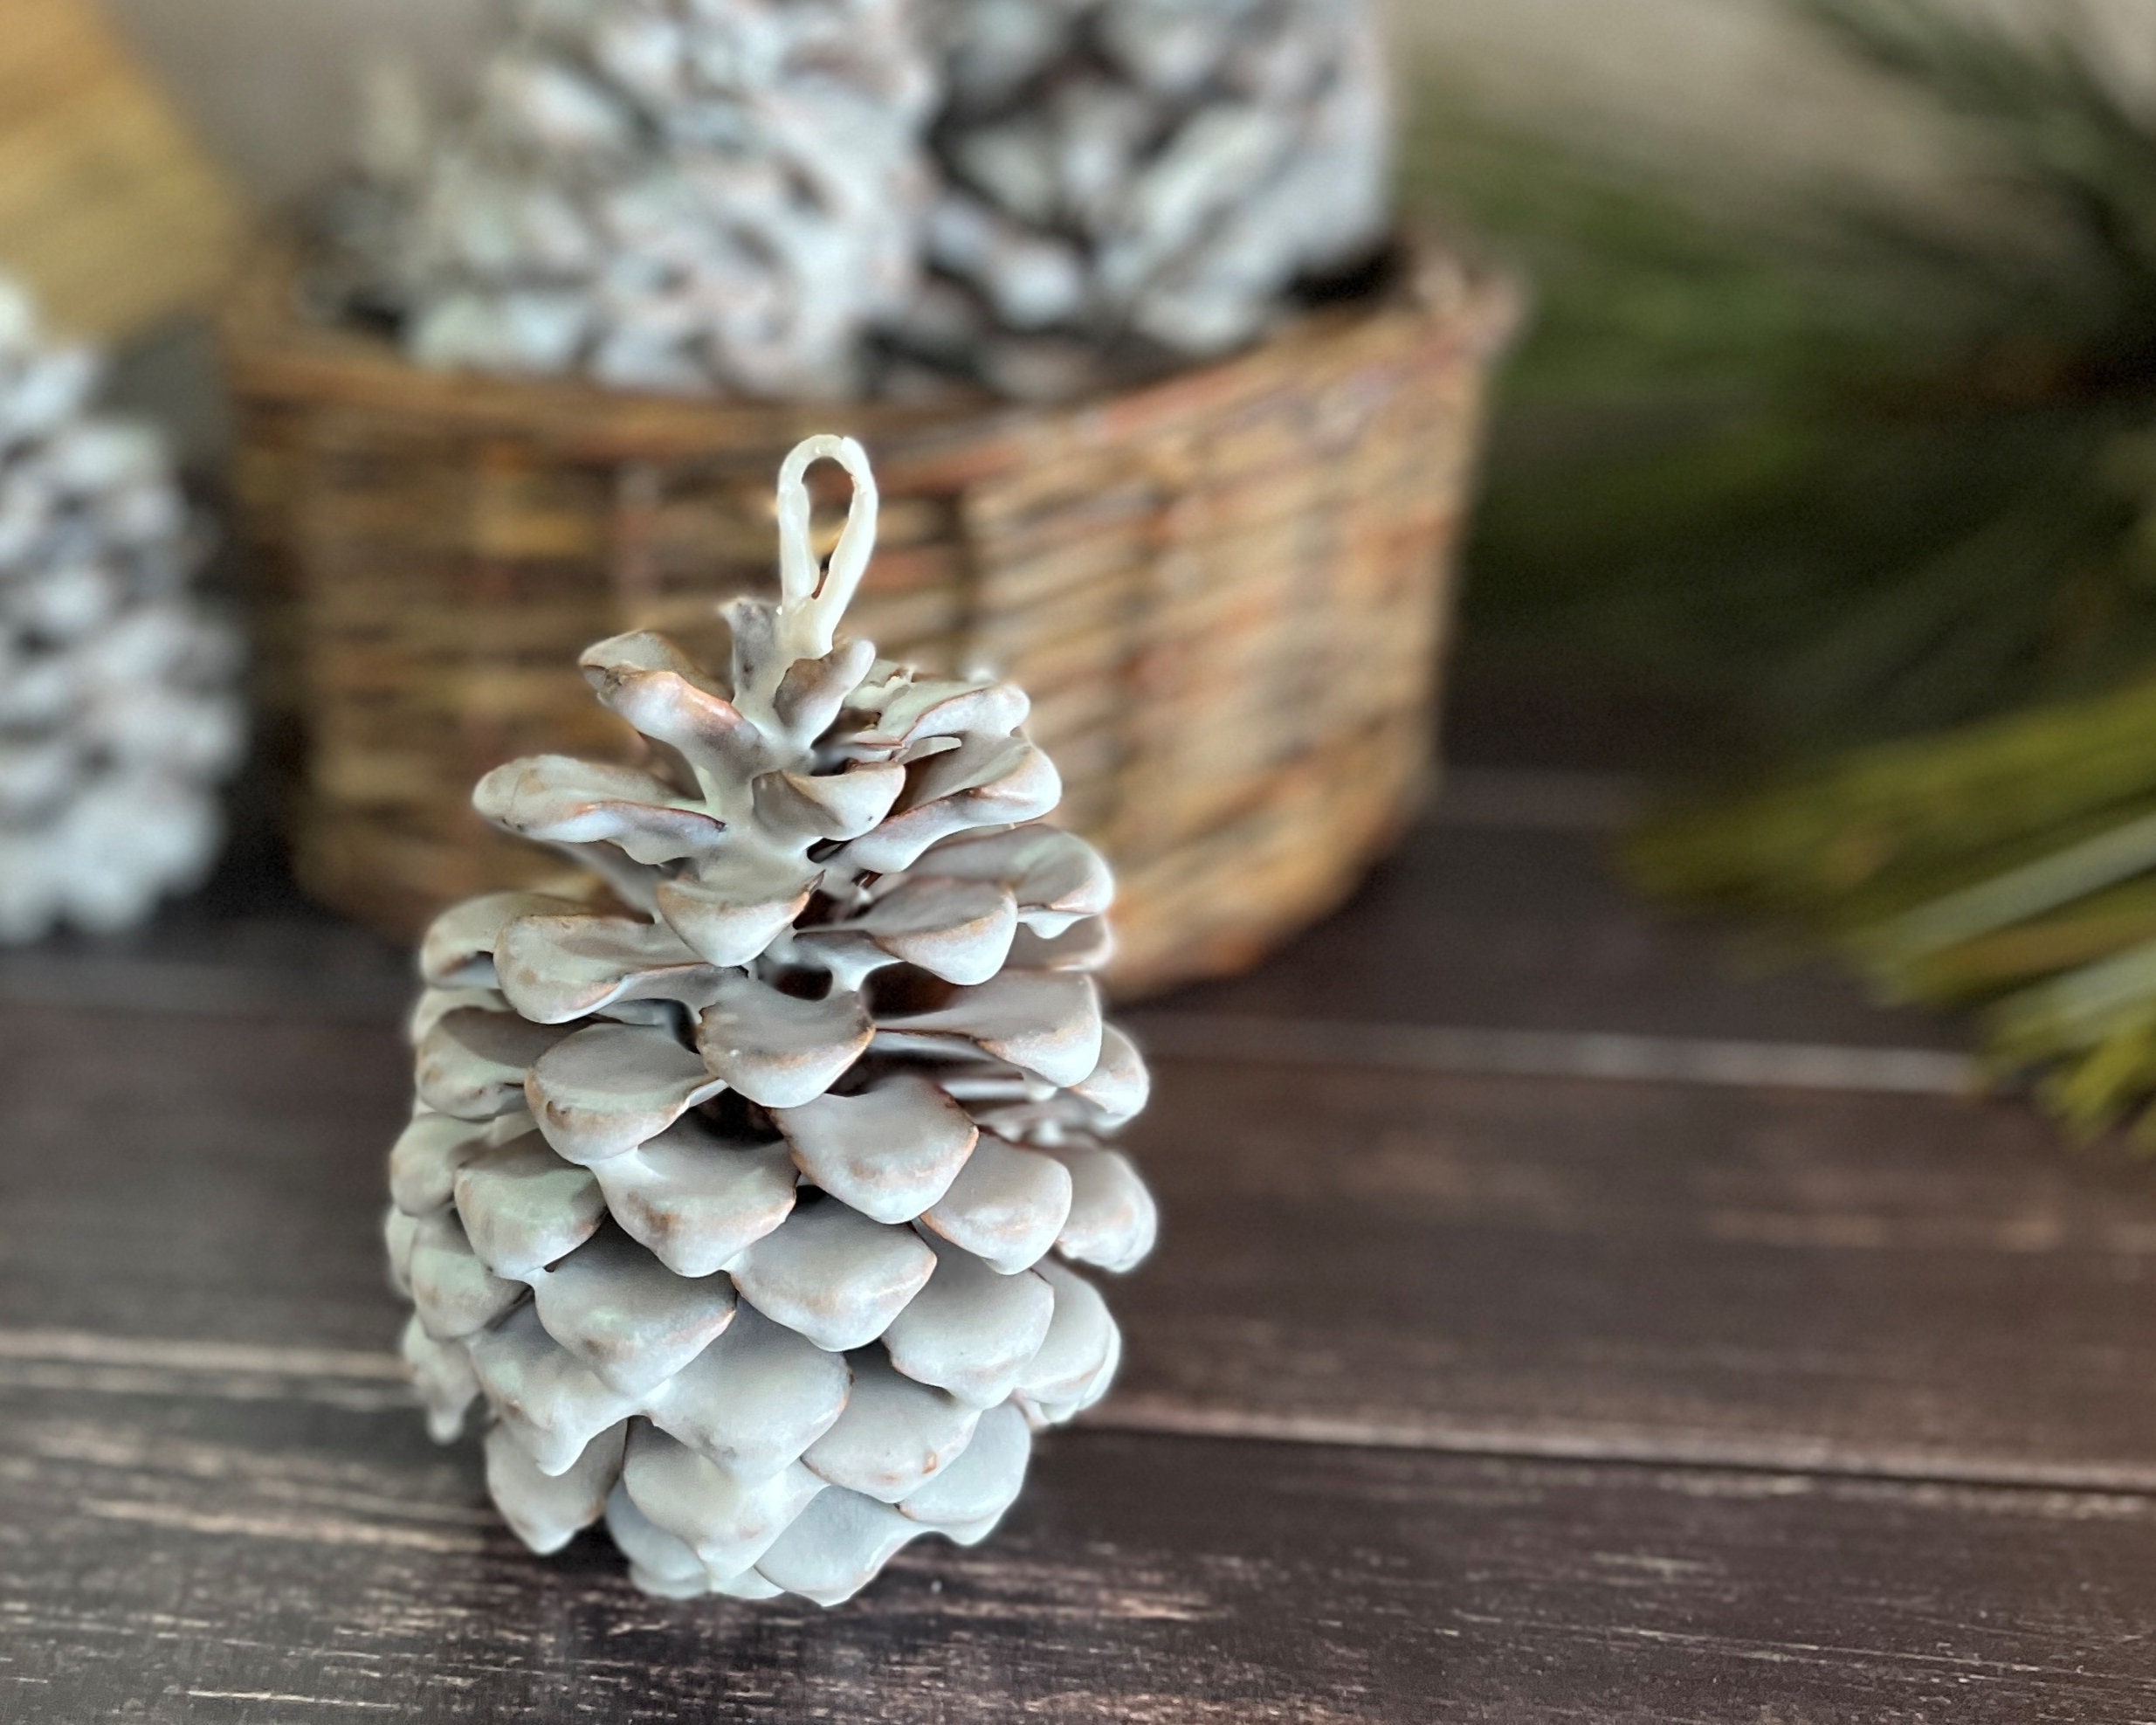 Pinecone Fire Starters Natural Unscented Soy Wax Rustic Decor Christmas  Gift Housewarming Gift 